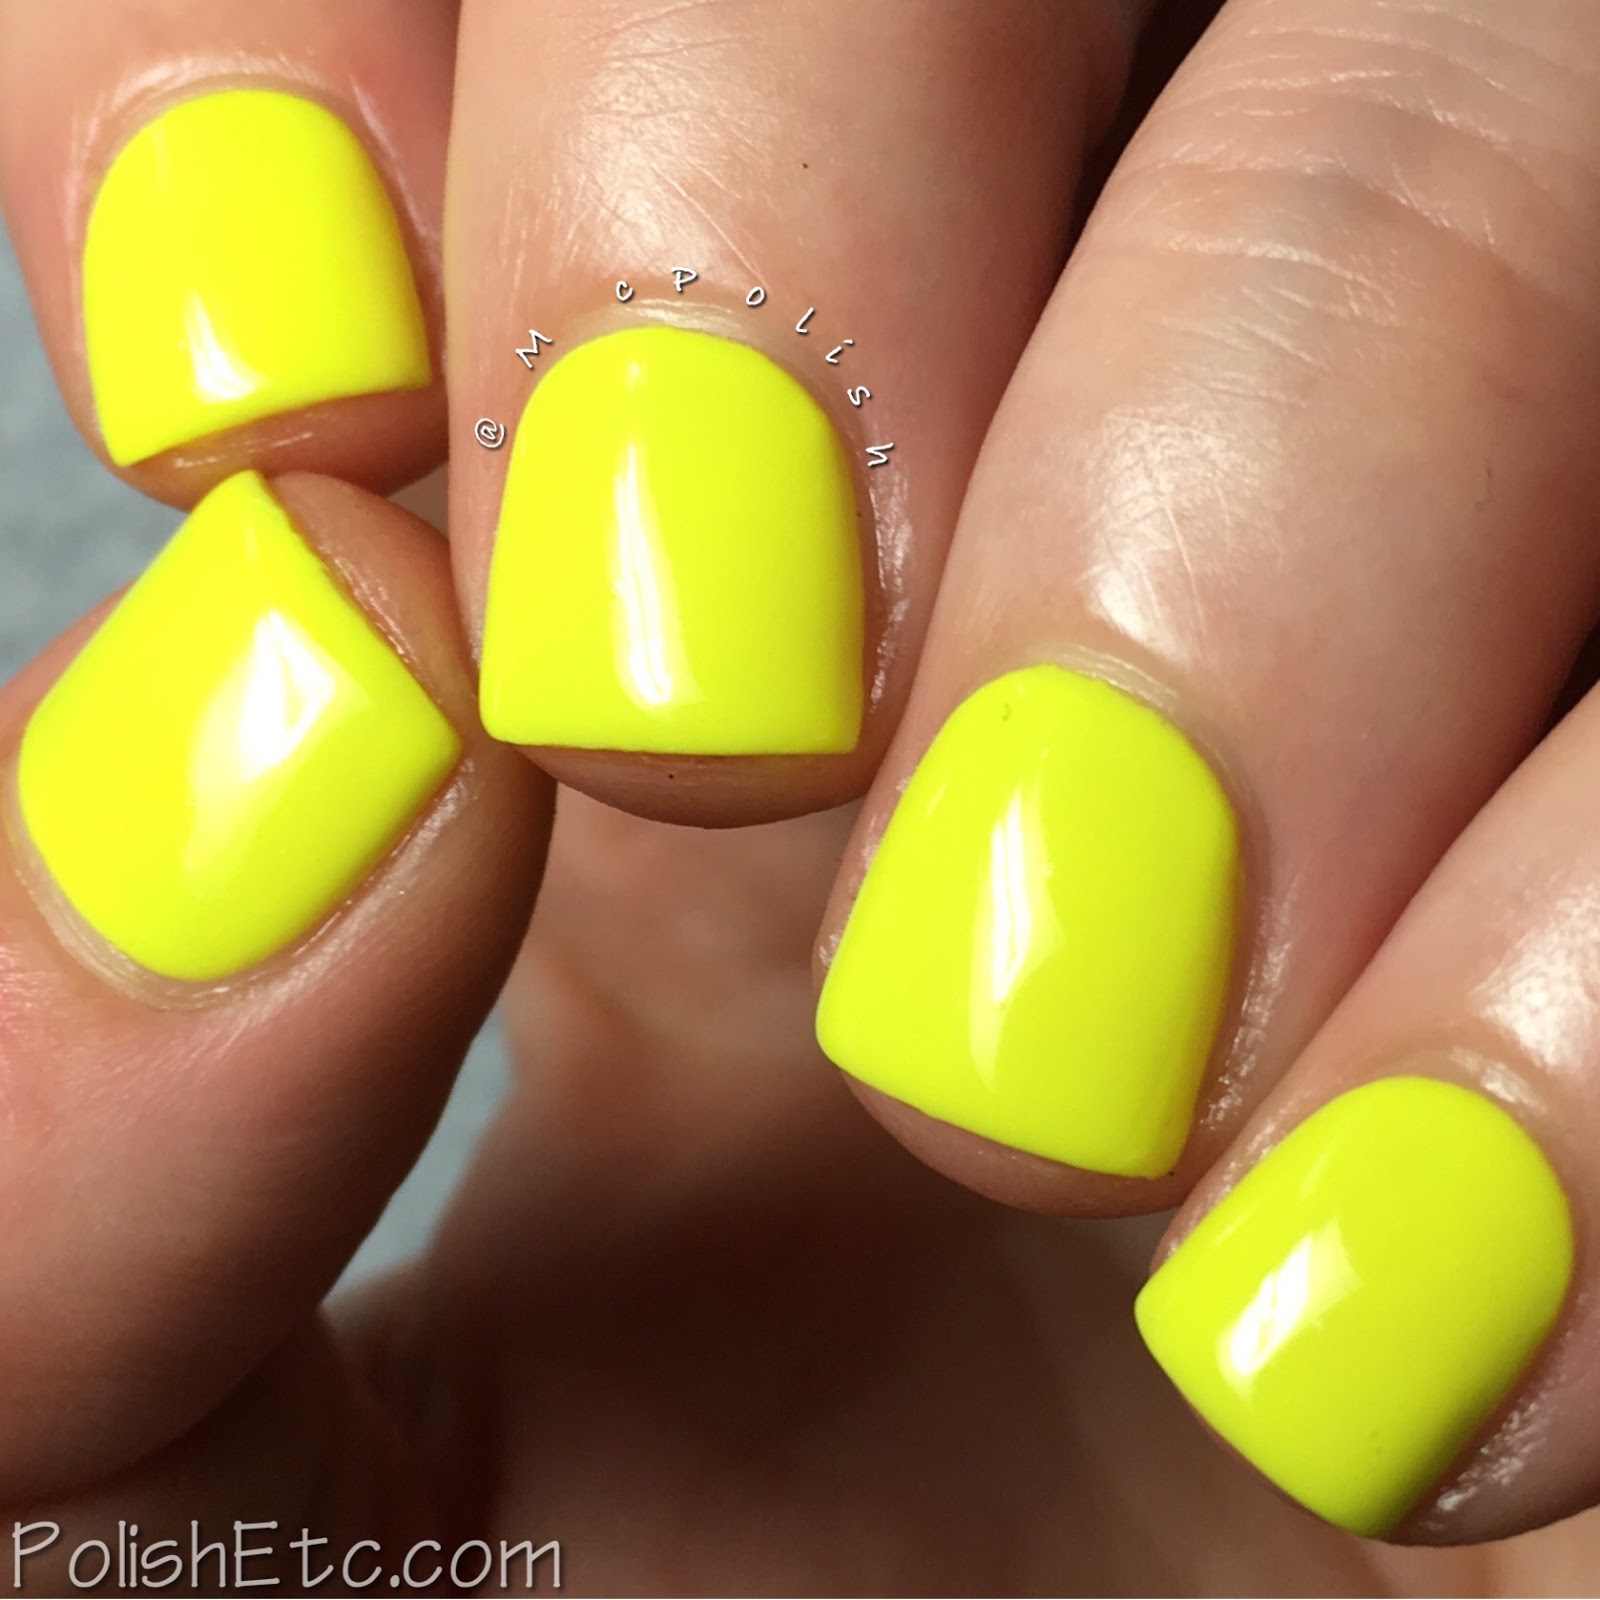 KBShimmer - All The Bright Moves Collection - McPolish - All The Bright Moves